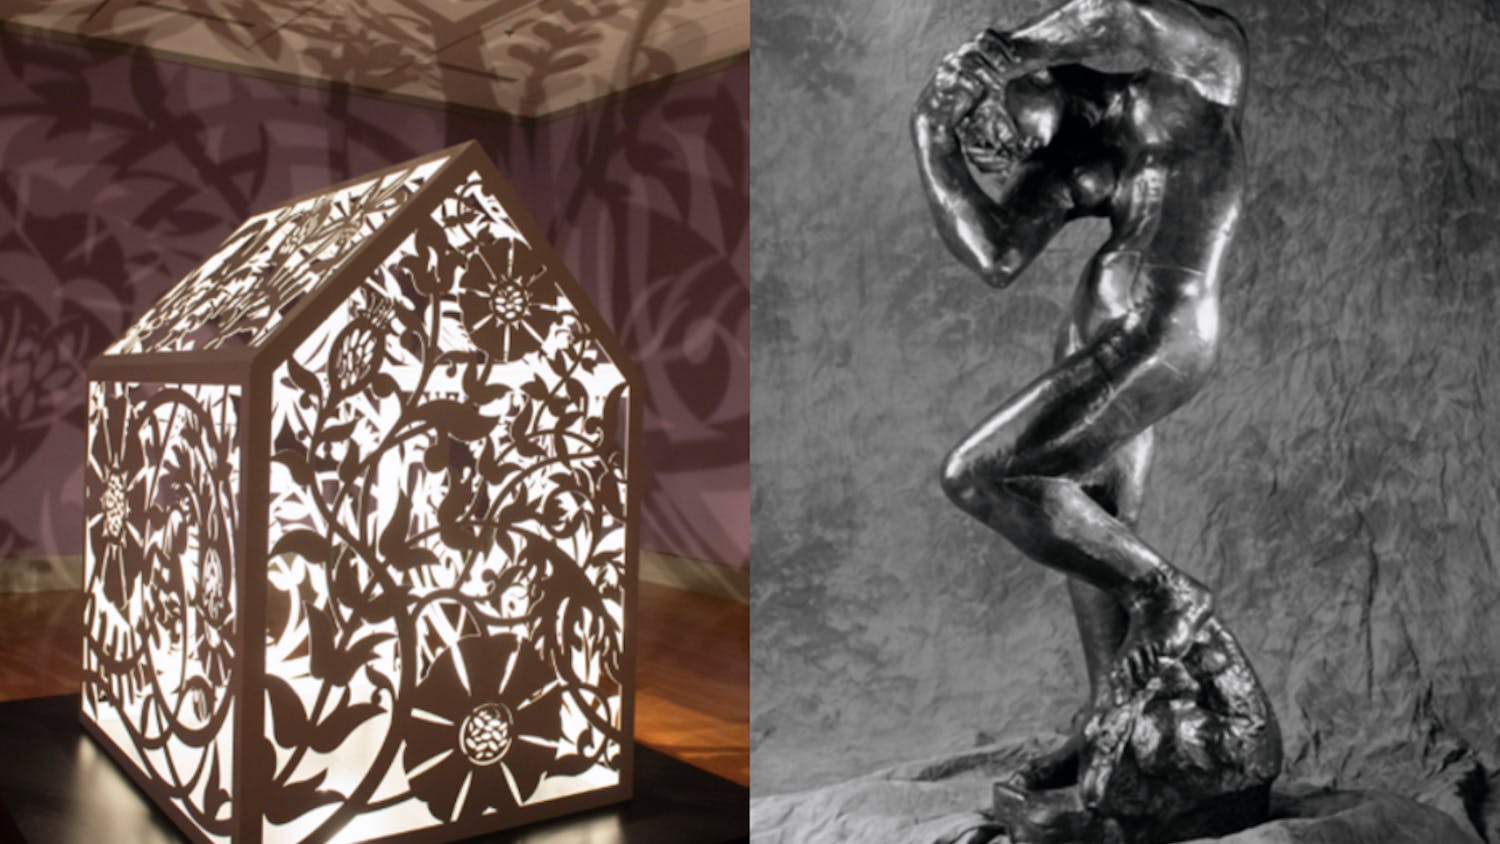 "This is NOT a Refuge!" (left) by artist Anila Quayyum Agha and "Meditation (with Arms)" (right) by artist Auguste Rodin on display. The "Rodin: Contemplation and Dreams" exhibit and the "Anila Quayyum Agha: Let A Million Flowers Bloom" exhibit can be viewed at the Columbia Museum of Art until May 2022.